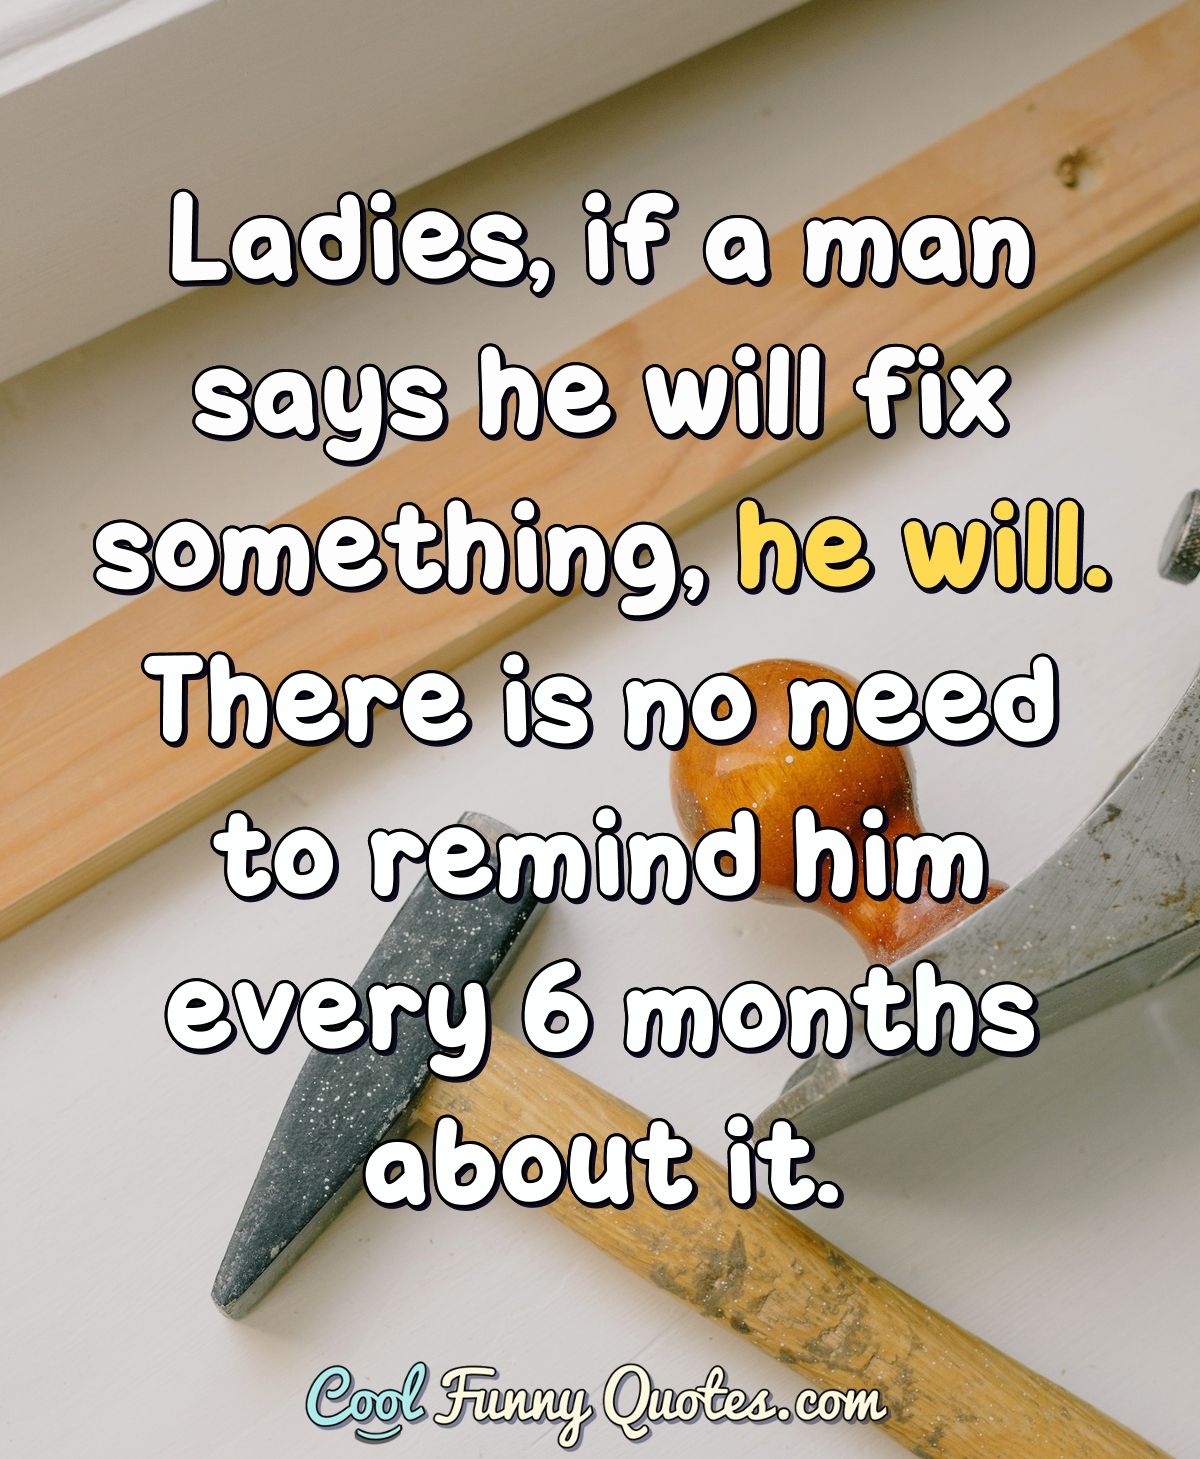 Ladies, if a man says he will fix something, he will. There is no need to...